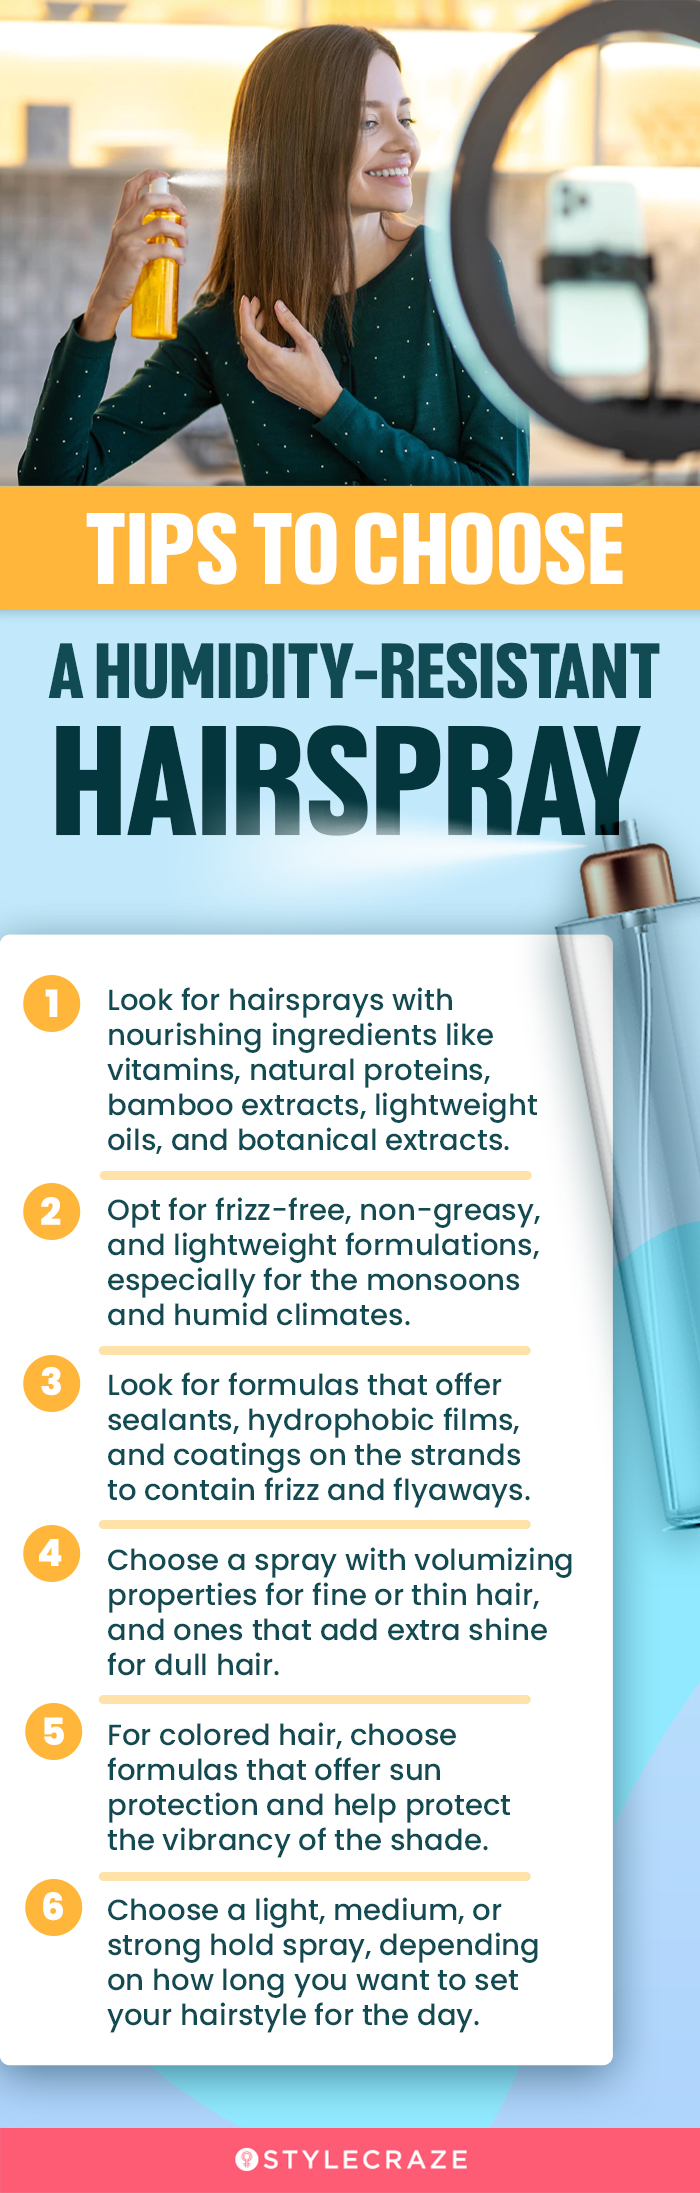 Tips To Choose A Humidity-Resistant Hairspray (infographic)